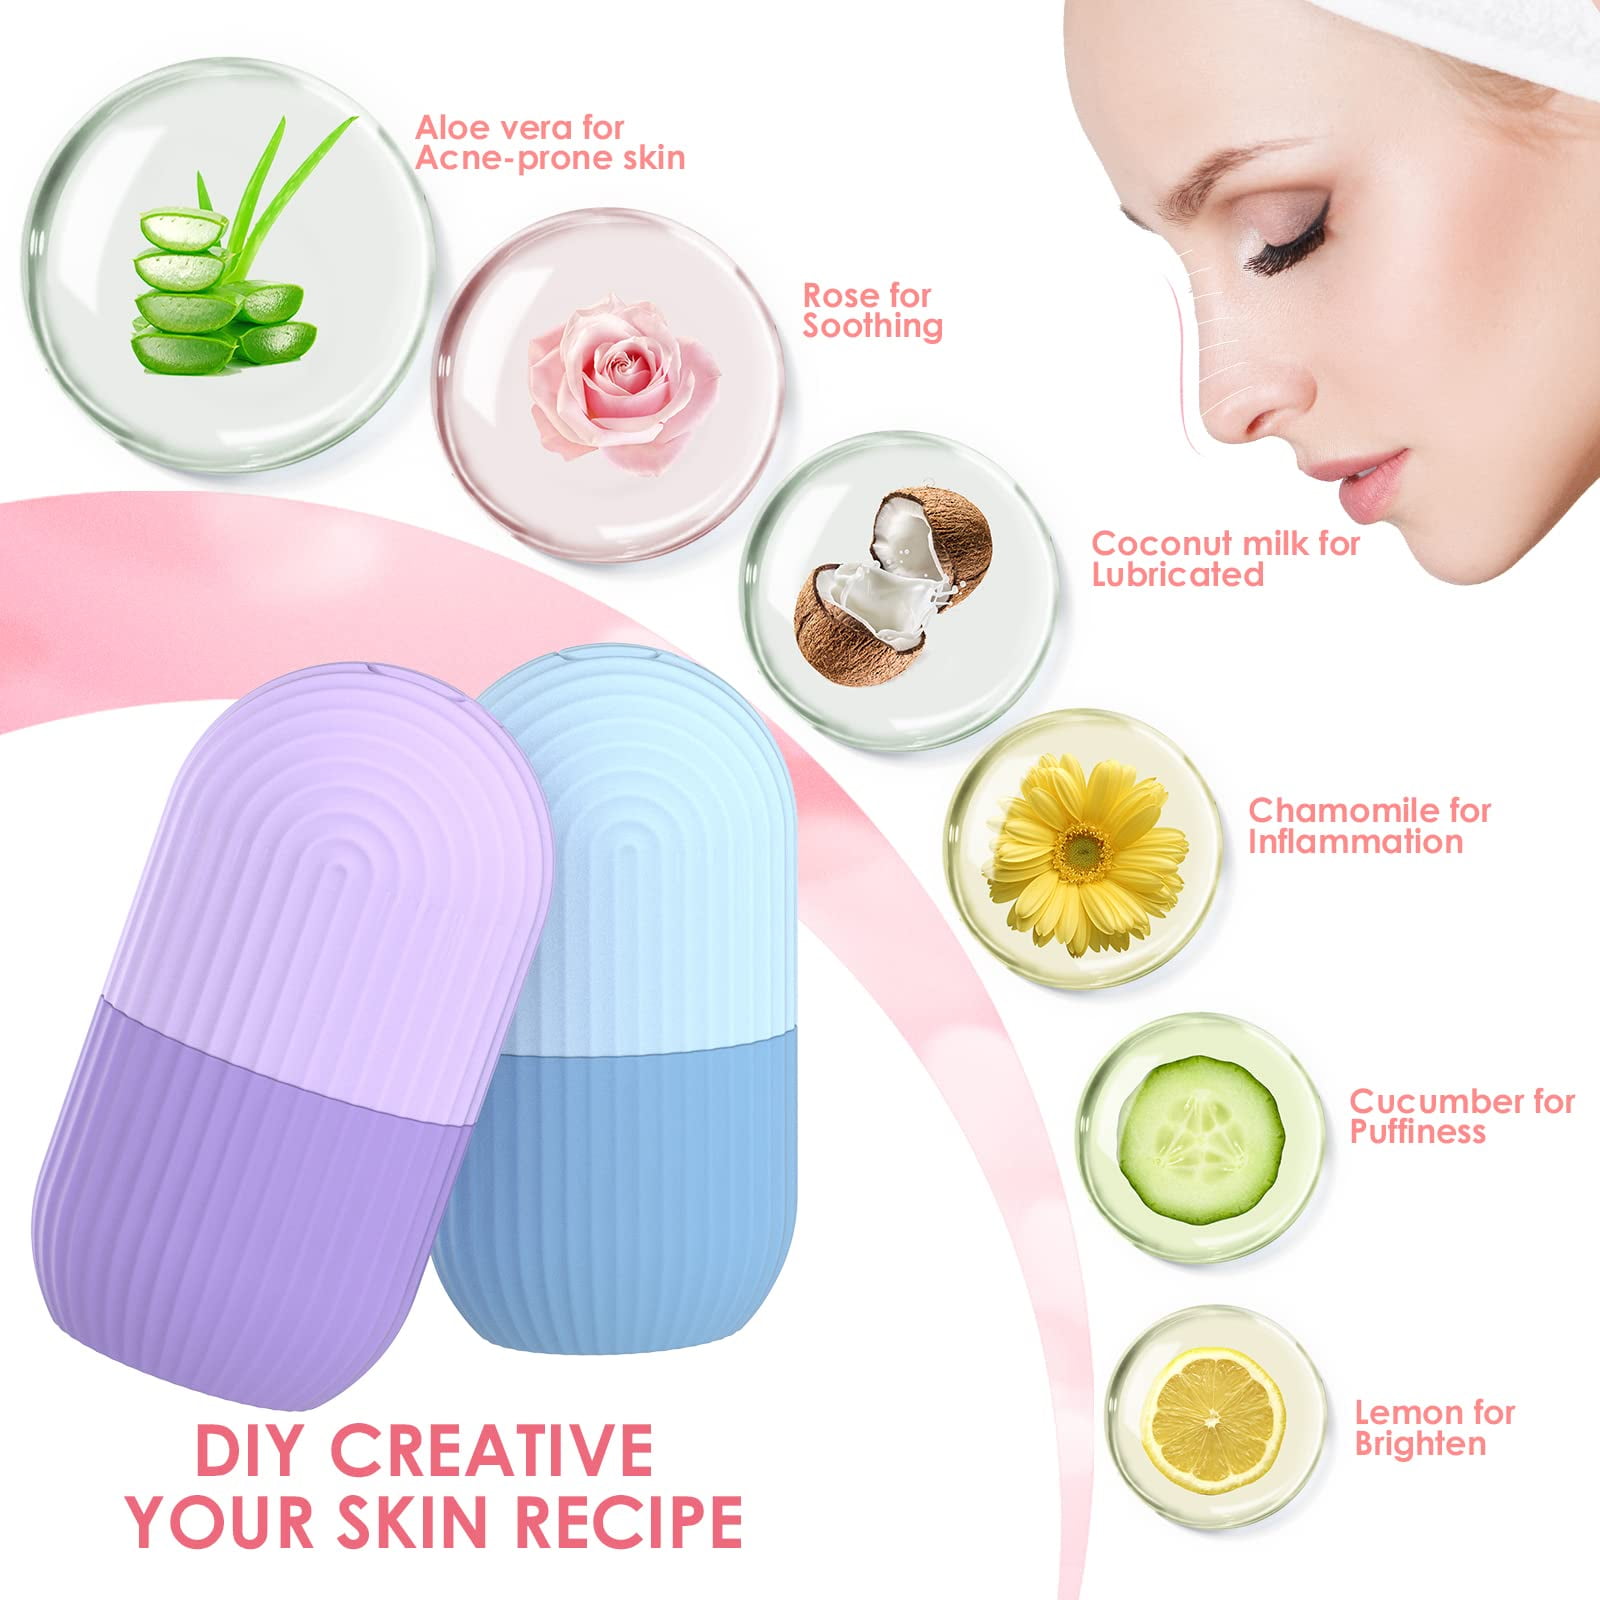 Cryo Cup Ice Massage Therapy - Revitalizing Facial Ice Roller, Face Roller  Massager, Ideal for Skin Refreshment and Soothing, Ice Balls for Effective